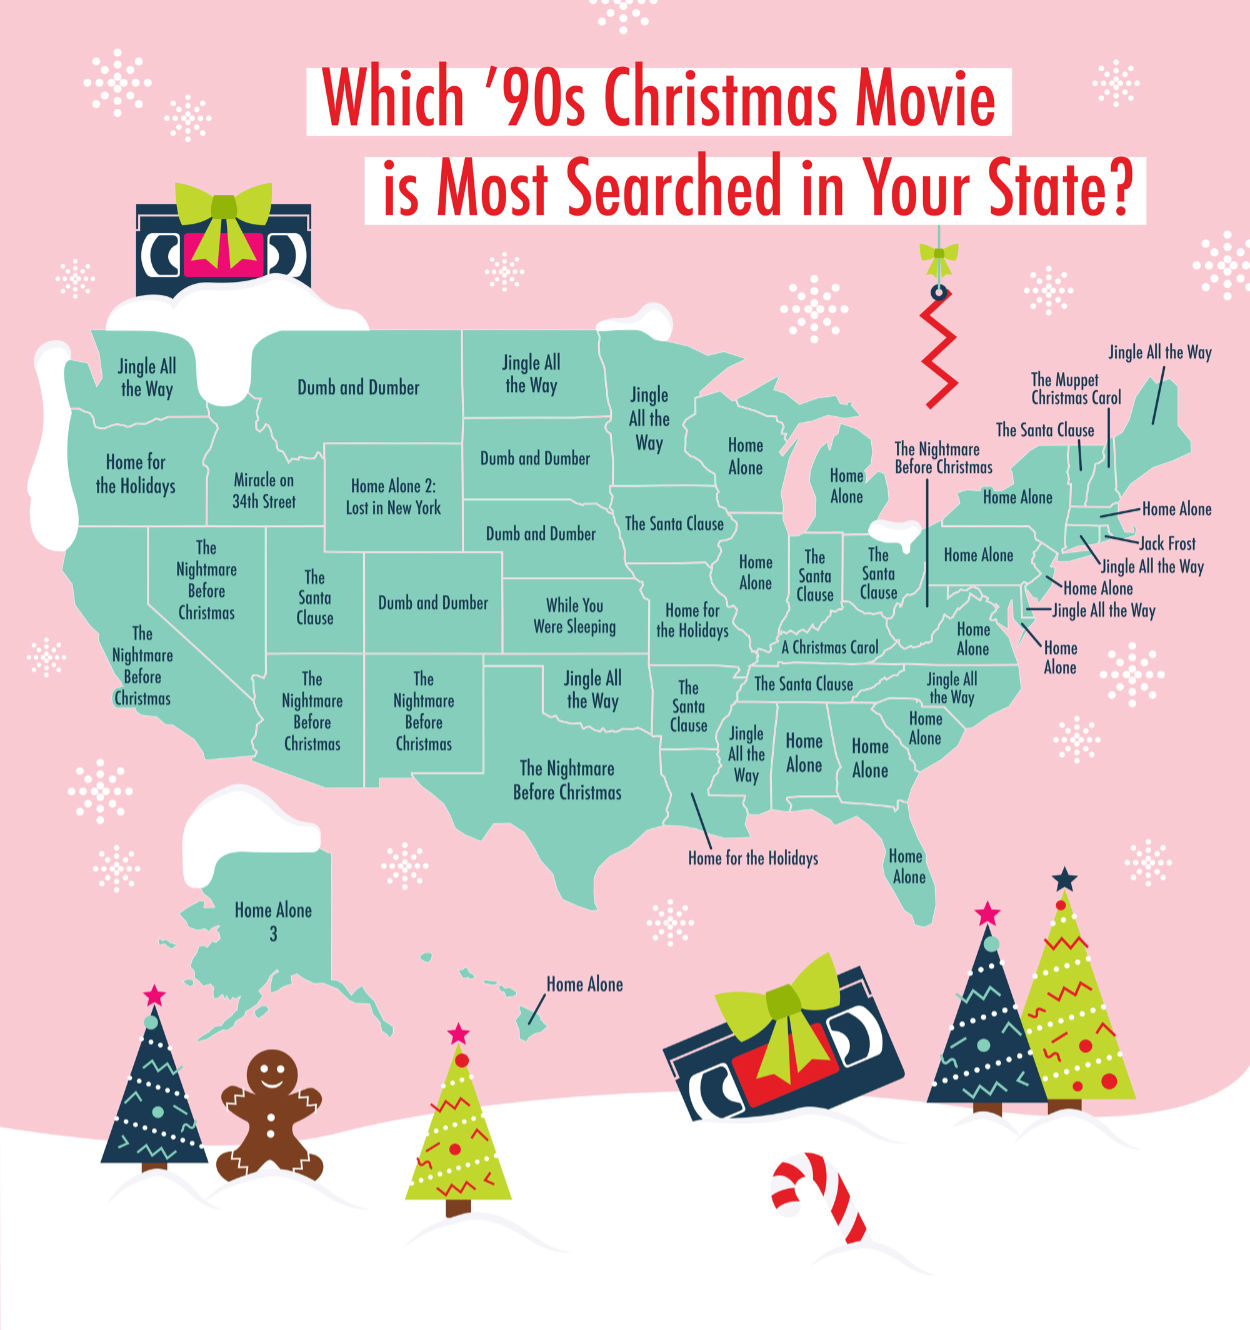 The most searched '90s Christmas movies from each state